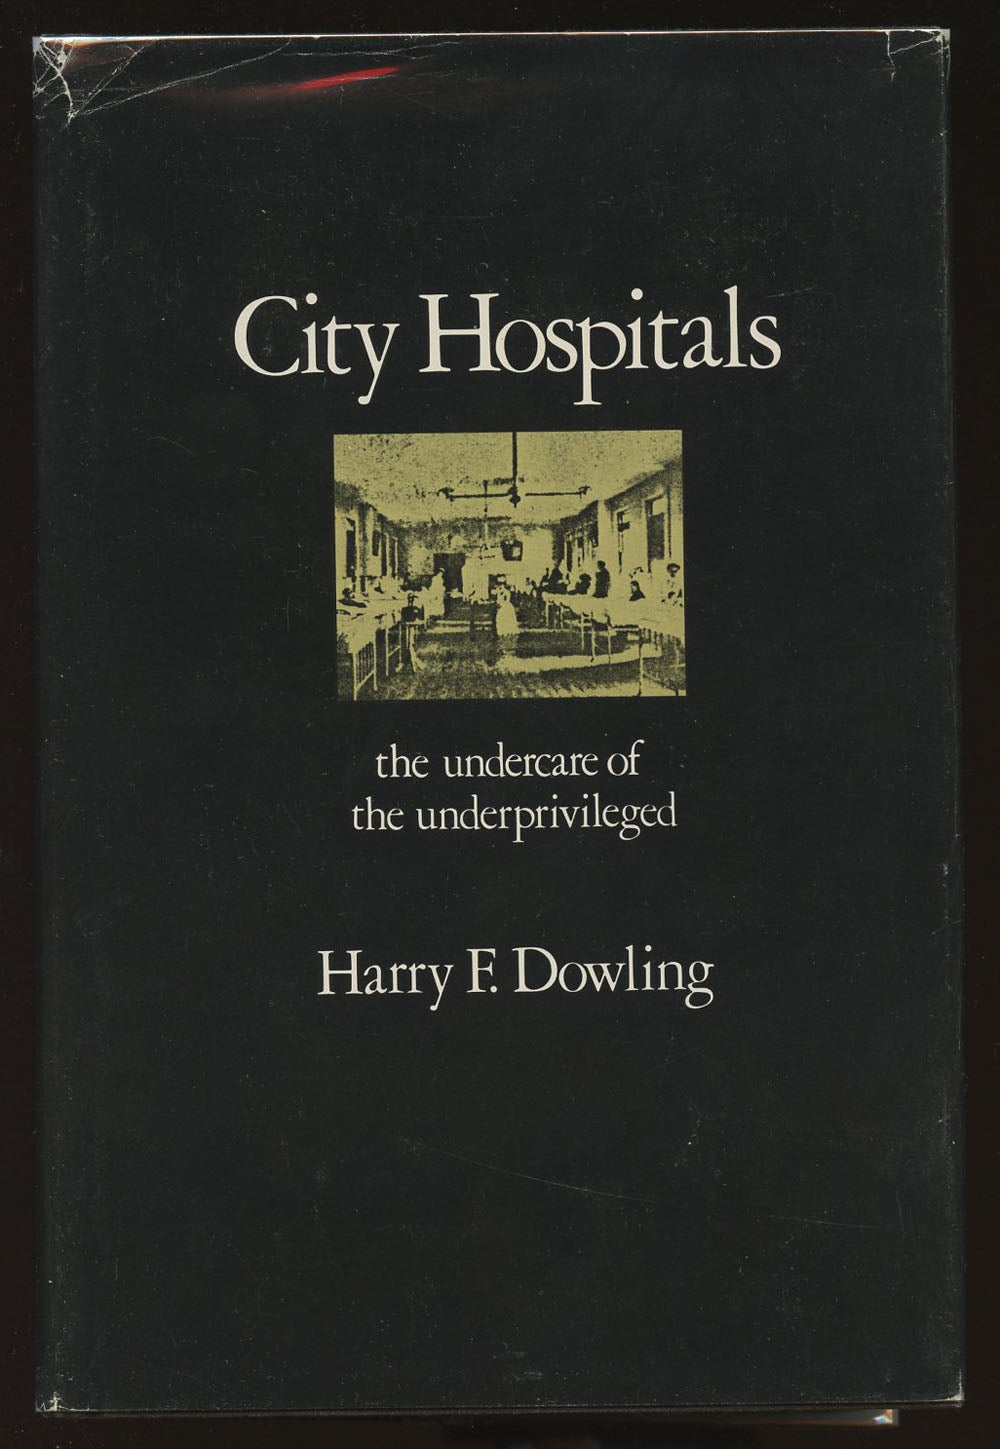 City Hospitals: The Undercare of the Underprivileged